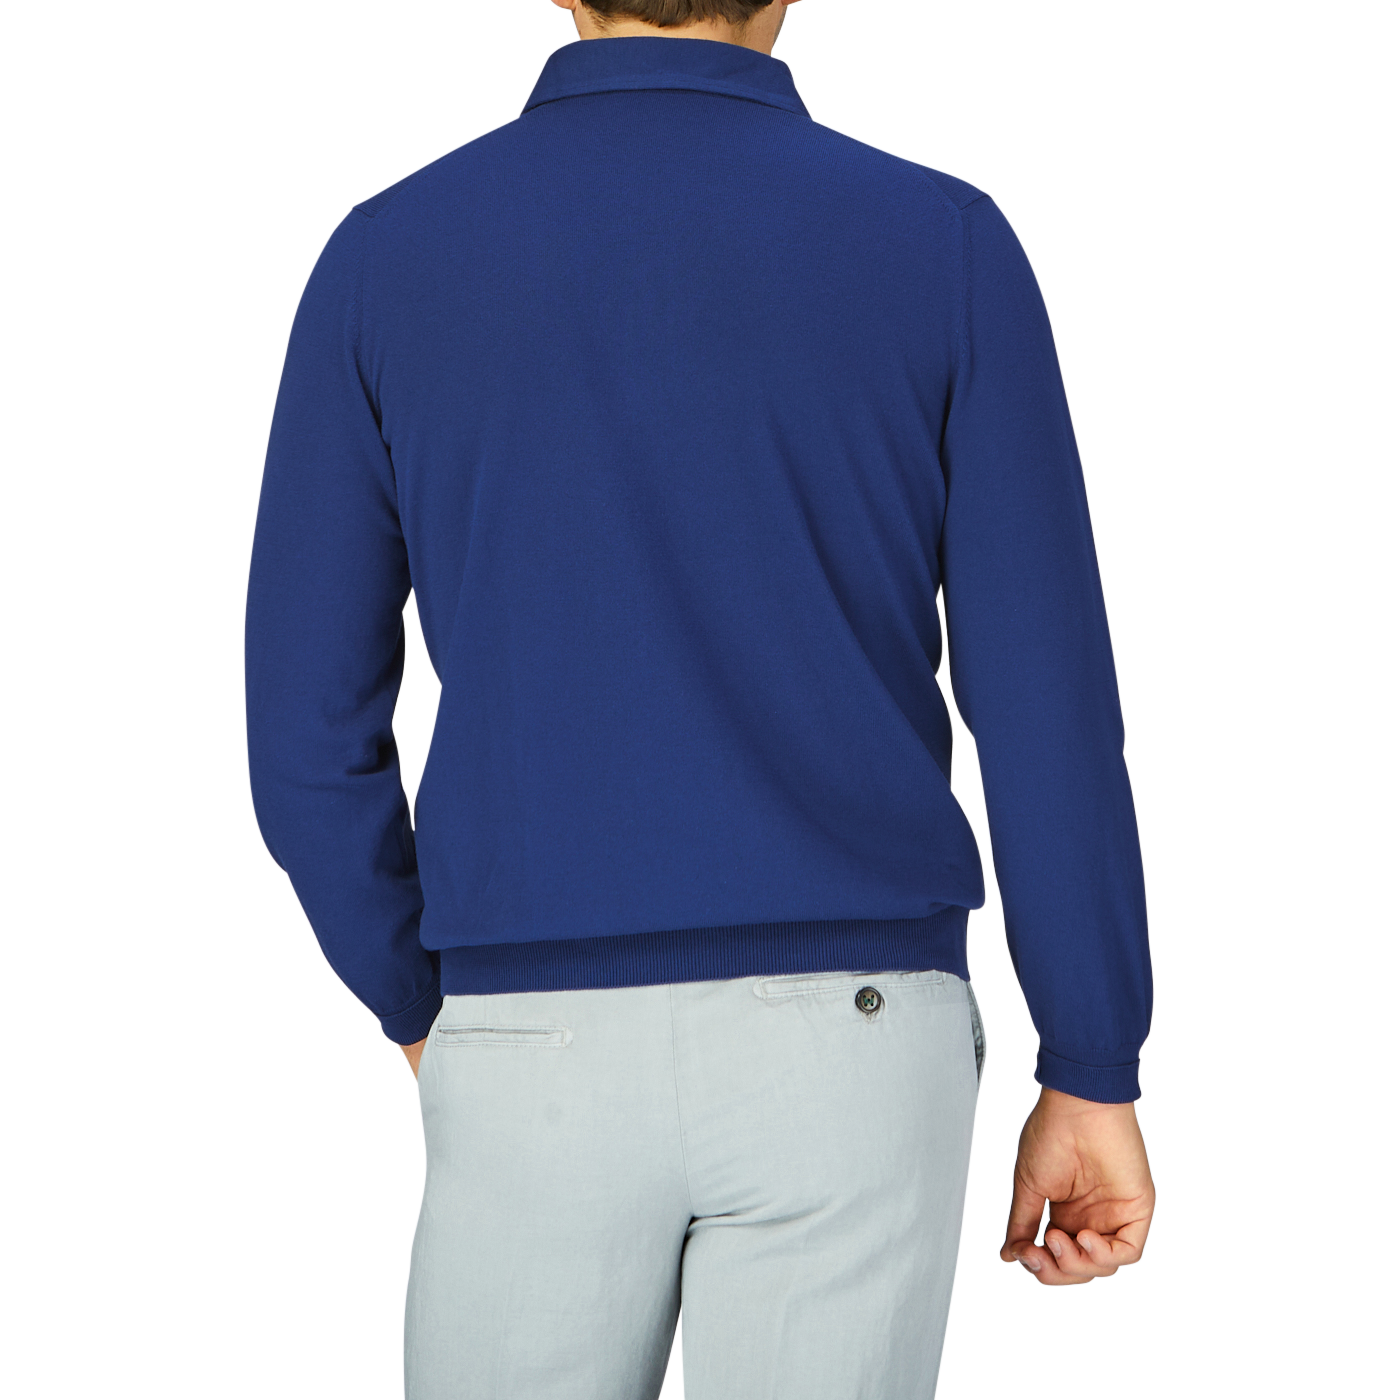 Rear view of a person wearing a Gran Sasso Indigo Blue Organic Cotton LS Polo Shirt and light gray pants.